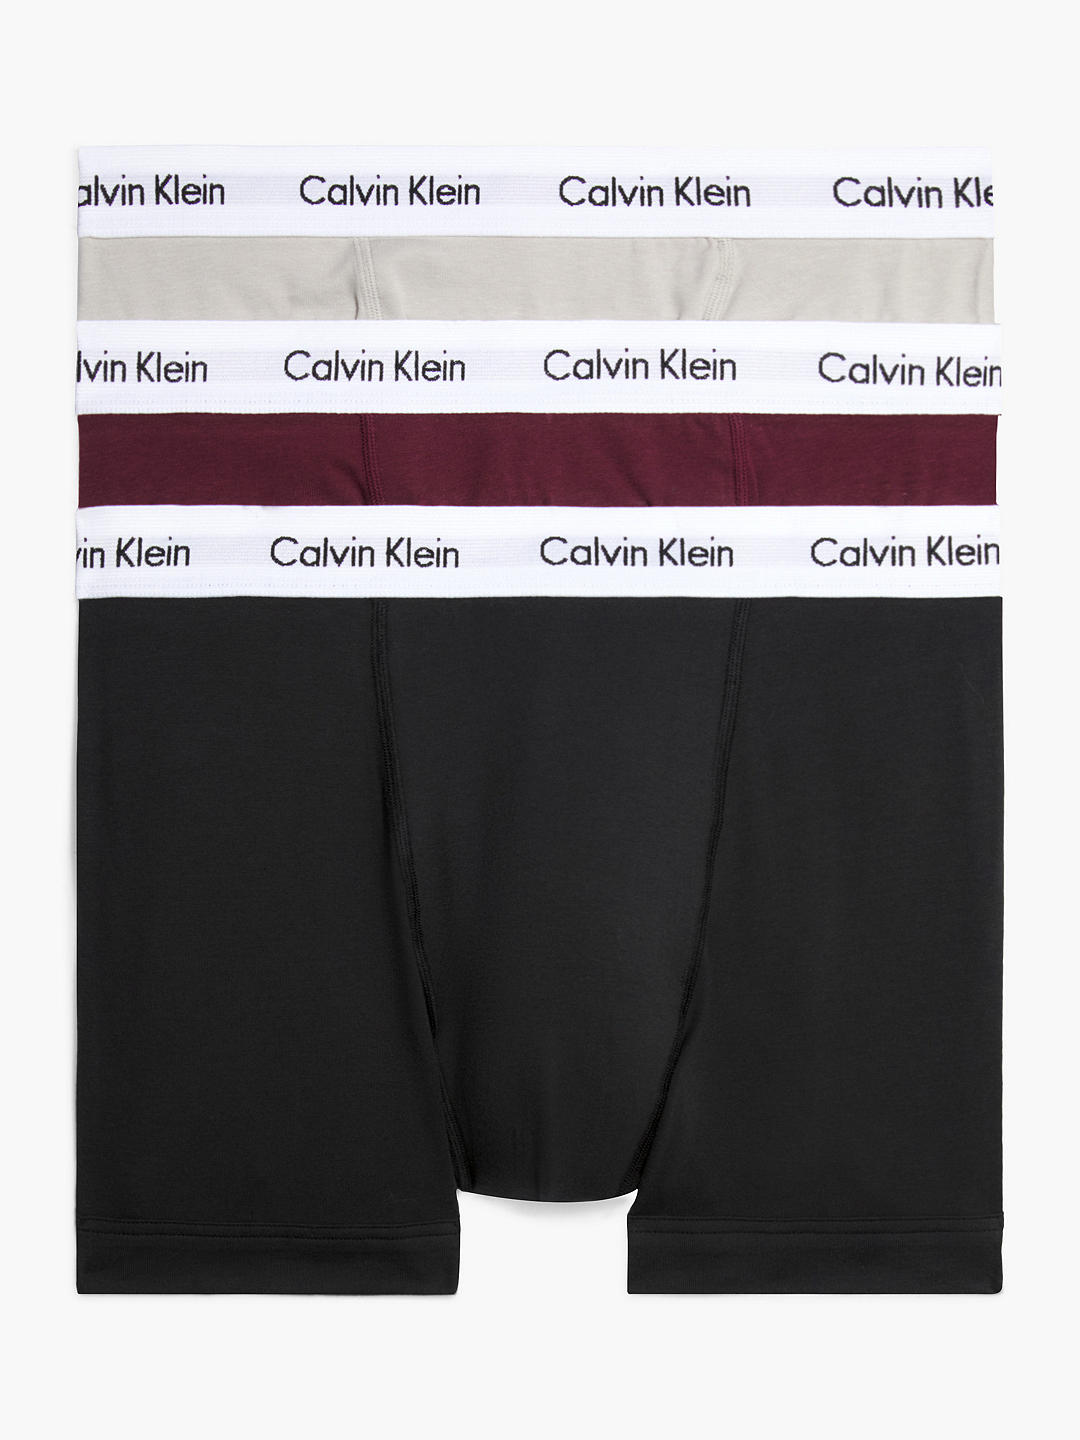 Calvin Klein Cotton Stretch Mid Rise Trunks, Pack of 3, Black/Red/Cream